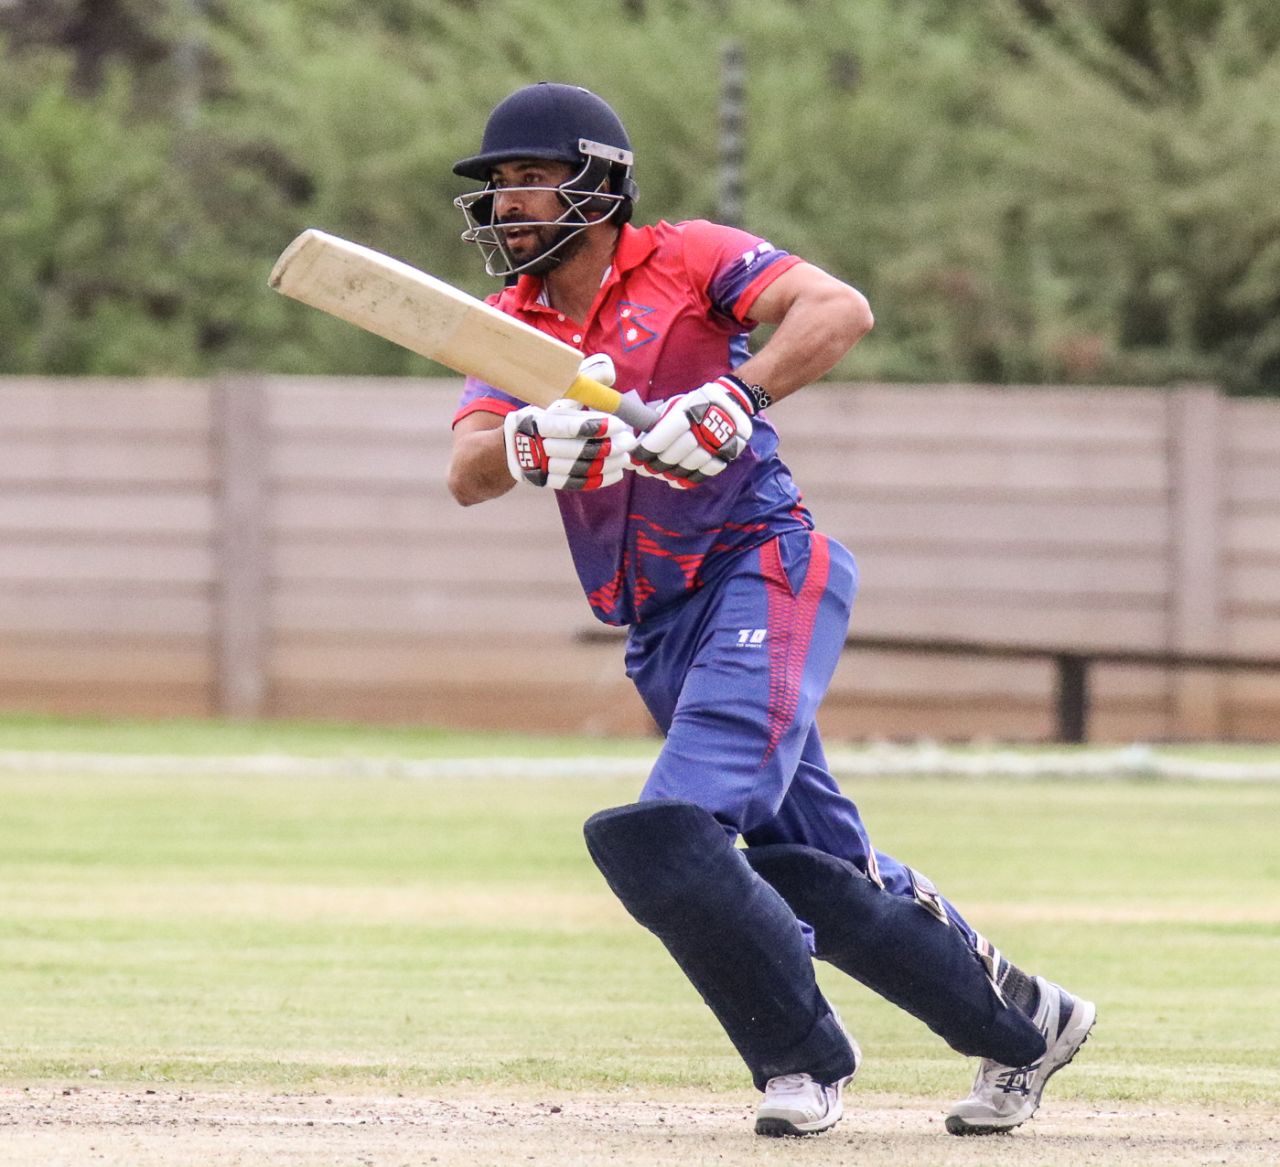 Sharad Vesawkar drives down the ground, Namibia v Nepal, ICC World Cricket League Division Two, Windhoek, February 8, 2018